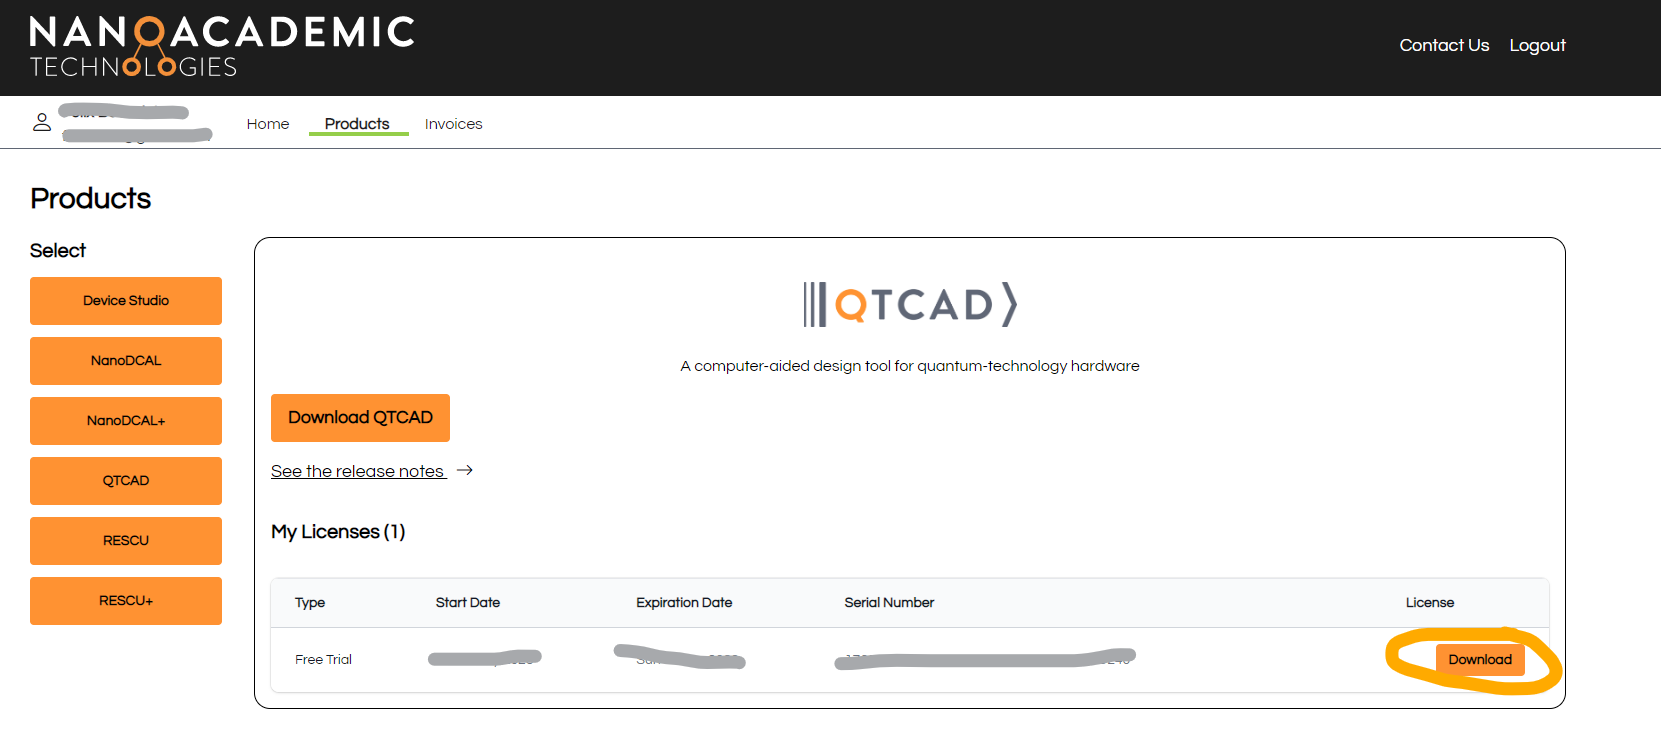 Downloading a free trial license of QTCAD